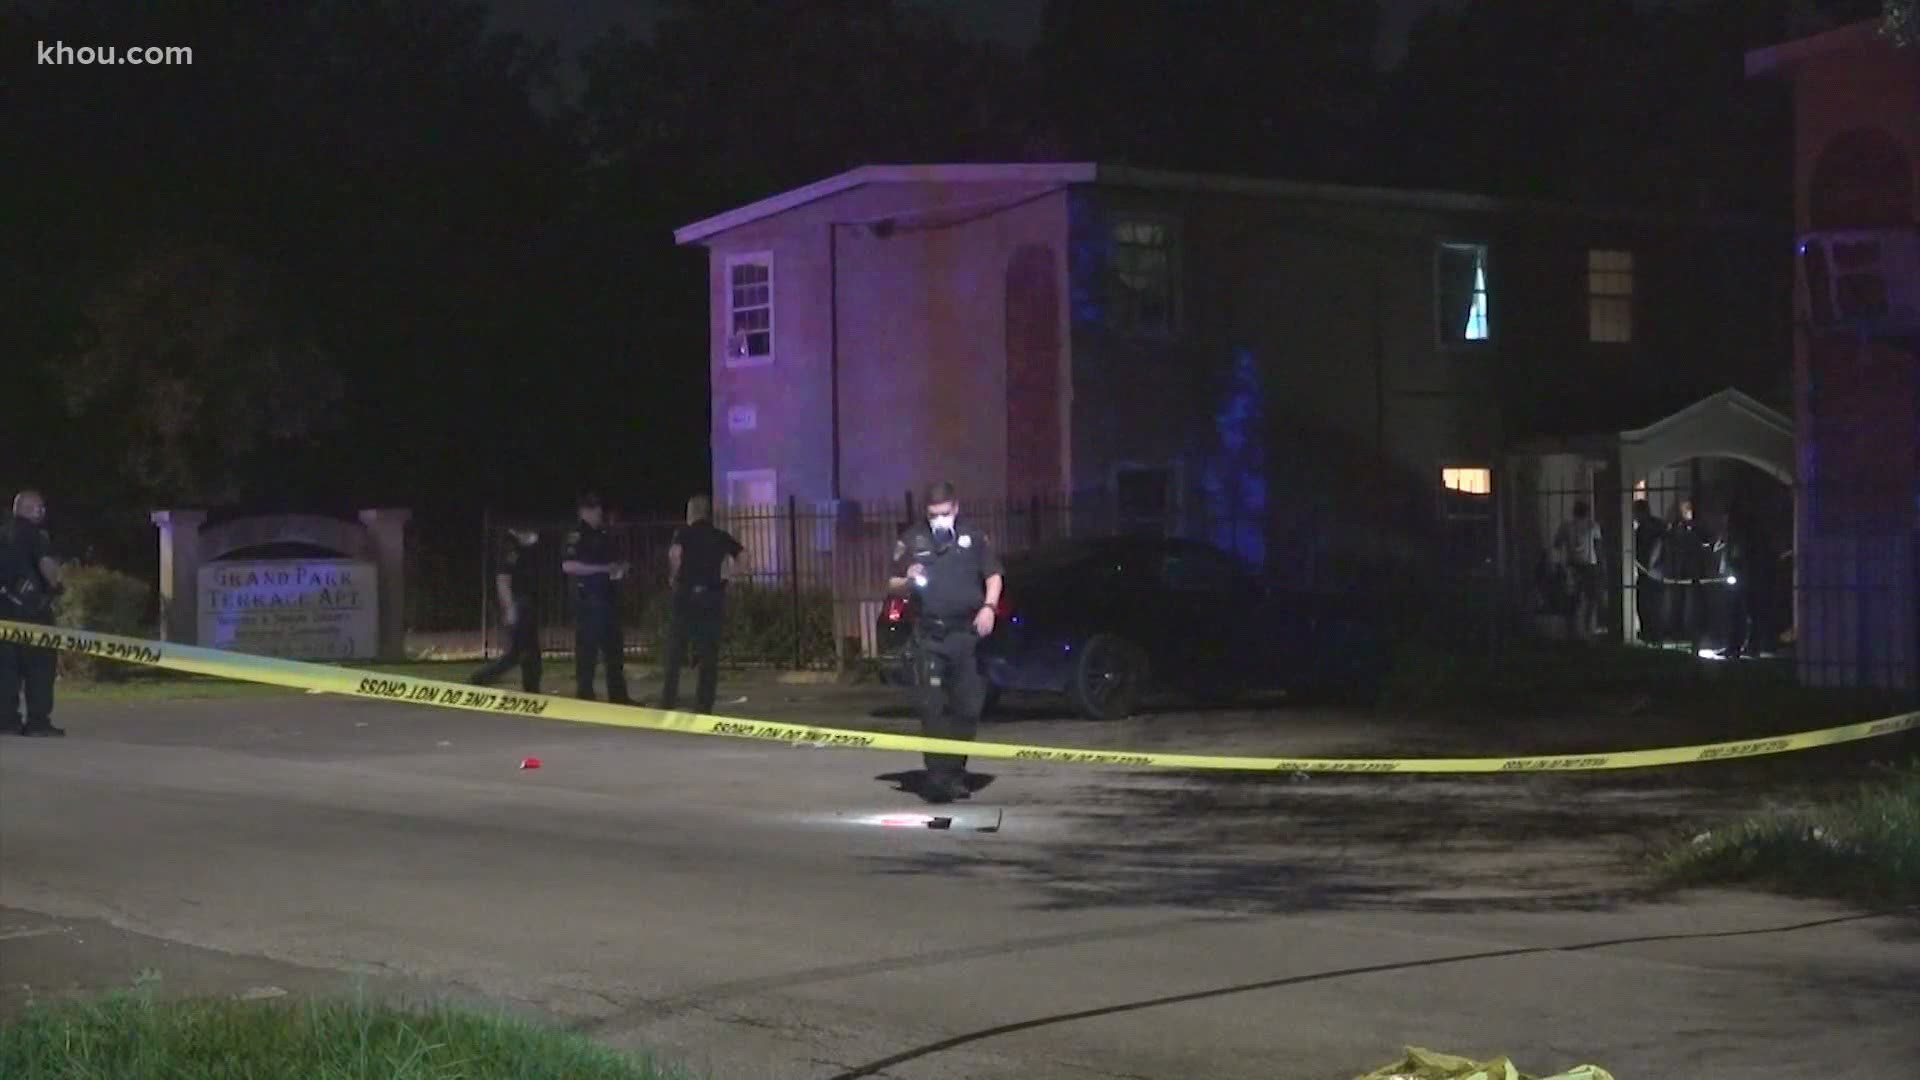 Three people were killed and another person was seriously hurt after a shooting in southeast Houston overnight.